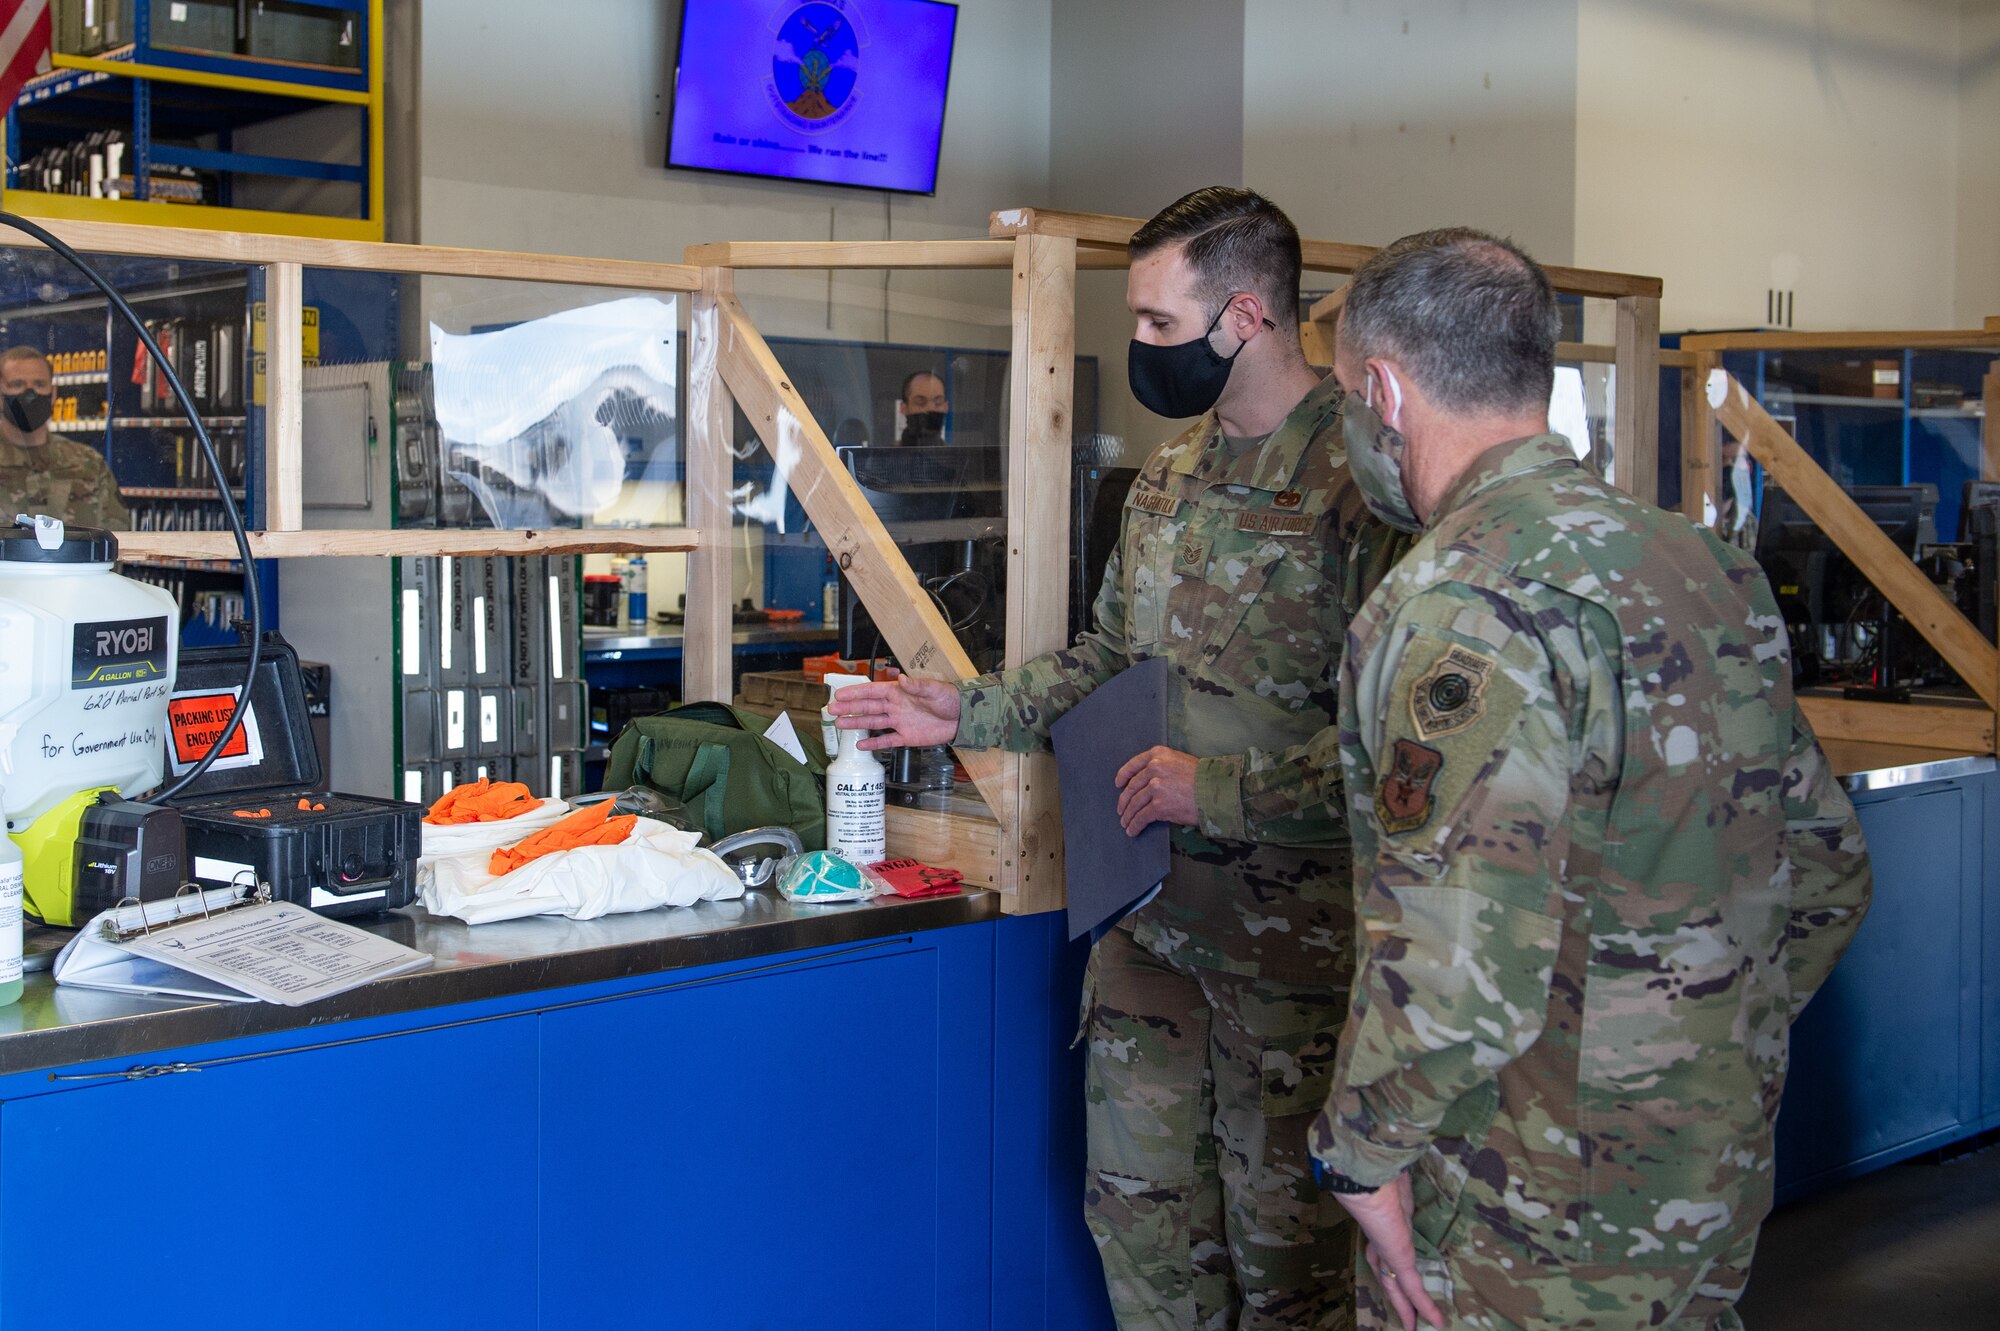 Tech. Sgt. Nathan Nachatilo, 62nd Aircraft Maintenance Squadron, left, explains the process of aircraft decontamination to Gen. David Goldfein, chief of staff of the Air Force, right, at Joint Base Lewis-McChord, Wash., June 18, 2020. During his tour of Team McChord, Goldfein visited the Western Air Defense Sector, 62nd Maintenance Squadron, 62nd Aircraft Maintenance Squadron and the 7th and 4th Airlift Squadrons to see how their mission shave been impacted by COVID-19. (U.S. Air Force photo by Senior Airman Sara Hoerichs)